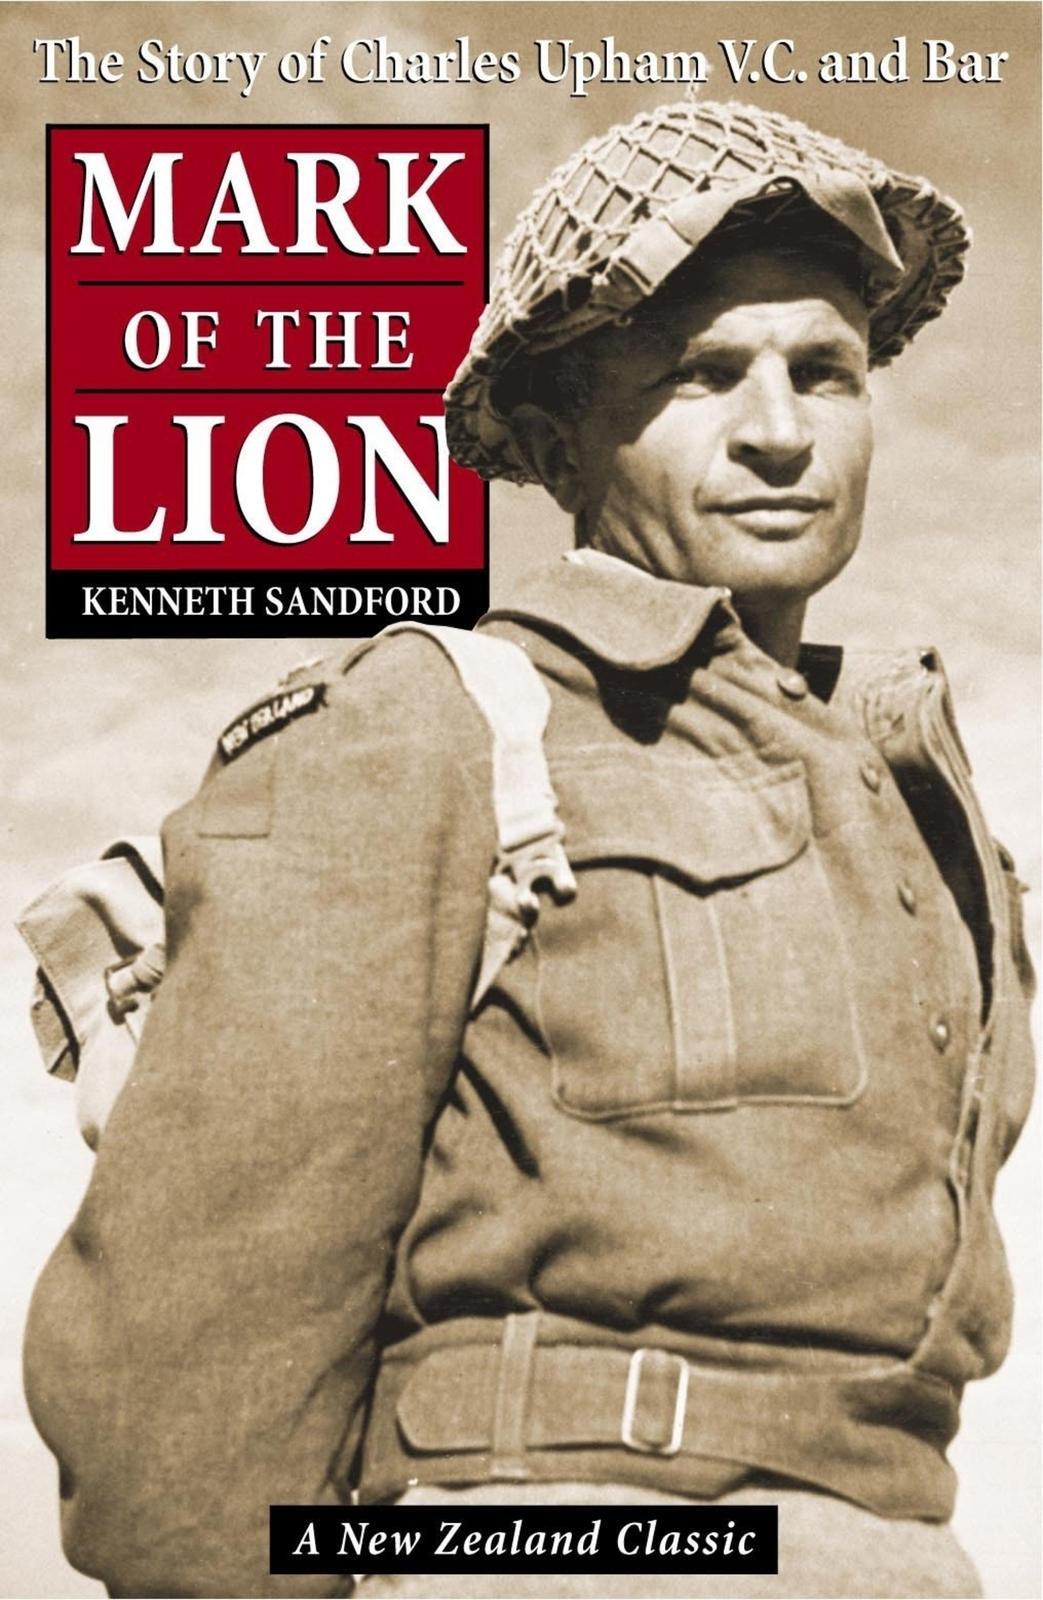 Mark of the Lion: The Story of Charles Upham VC and Bar